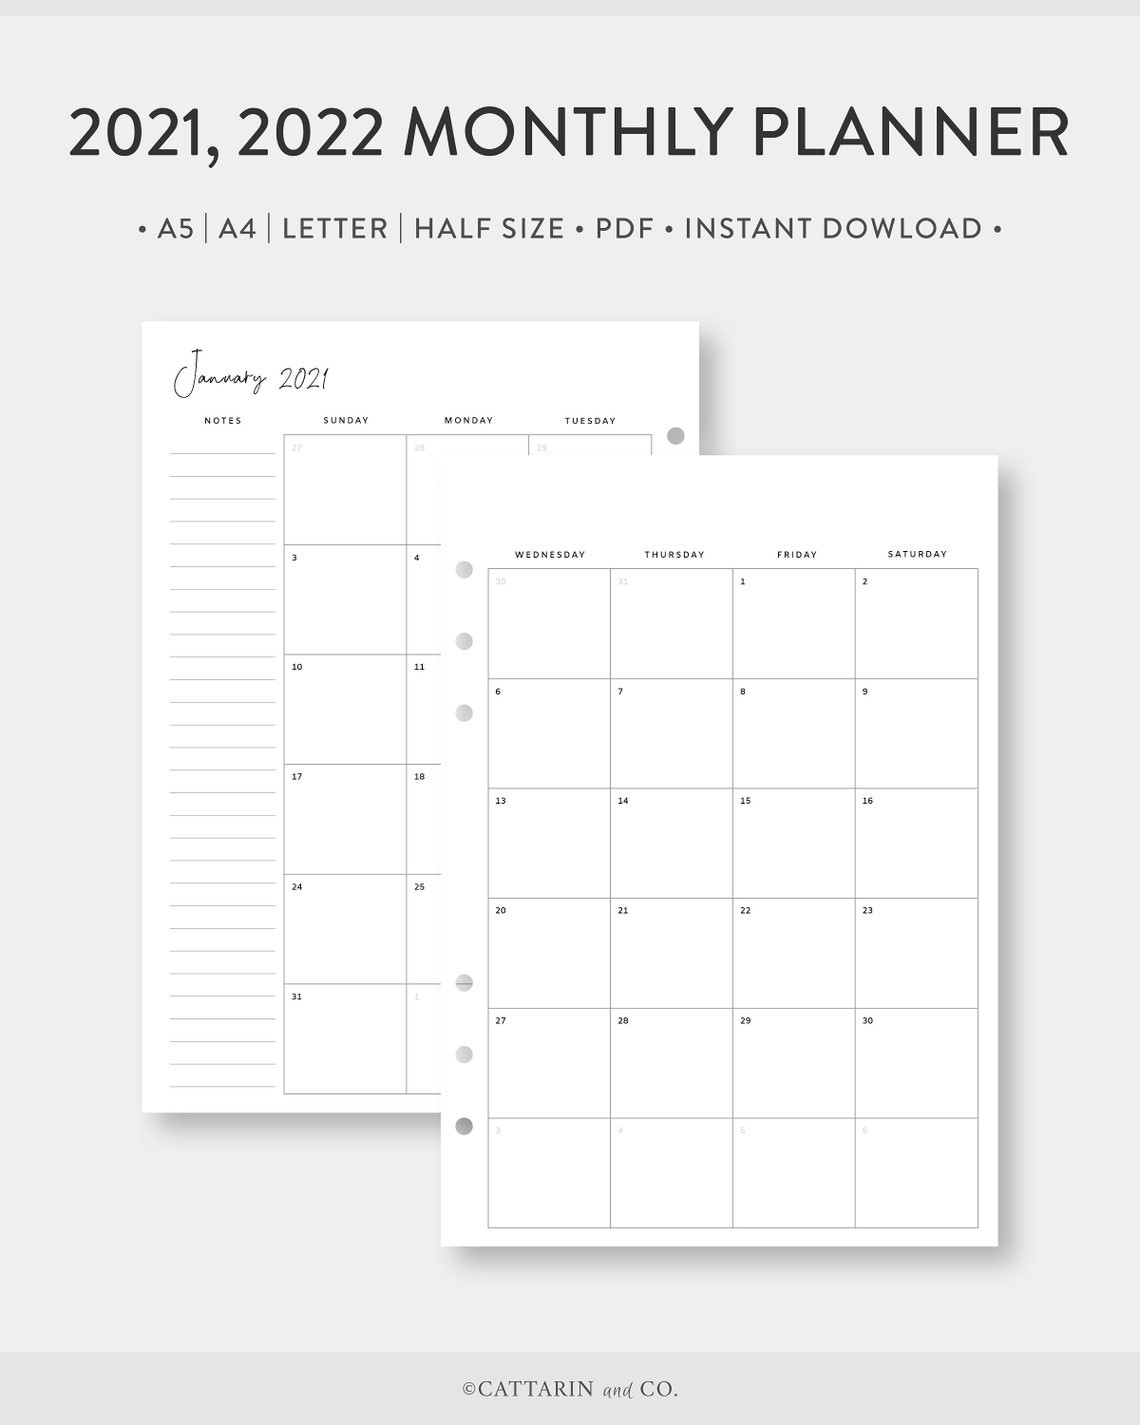 2021 2022 Monthly Planner Printable Calendar On Two Pages-Printable 2021 Monthly Calendar 2 Pages